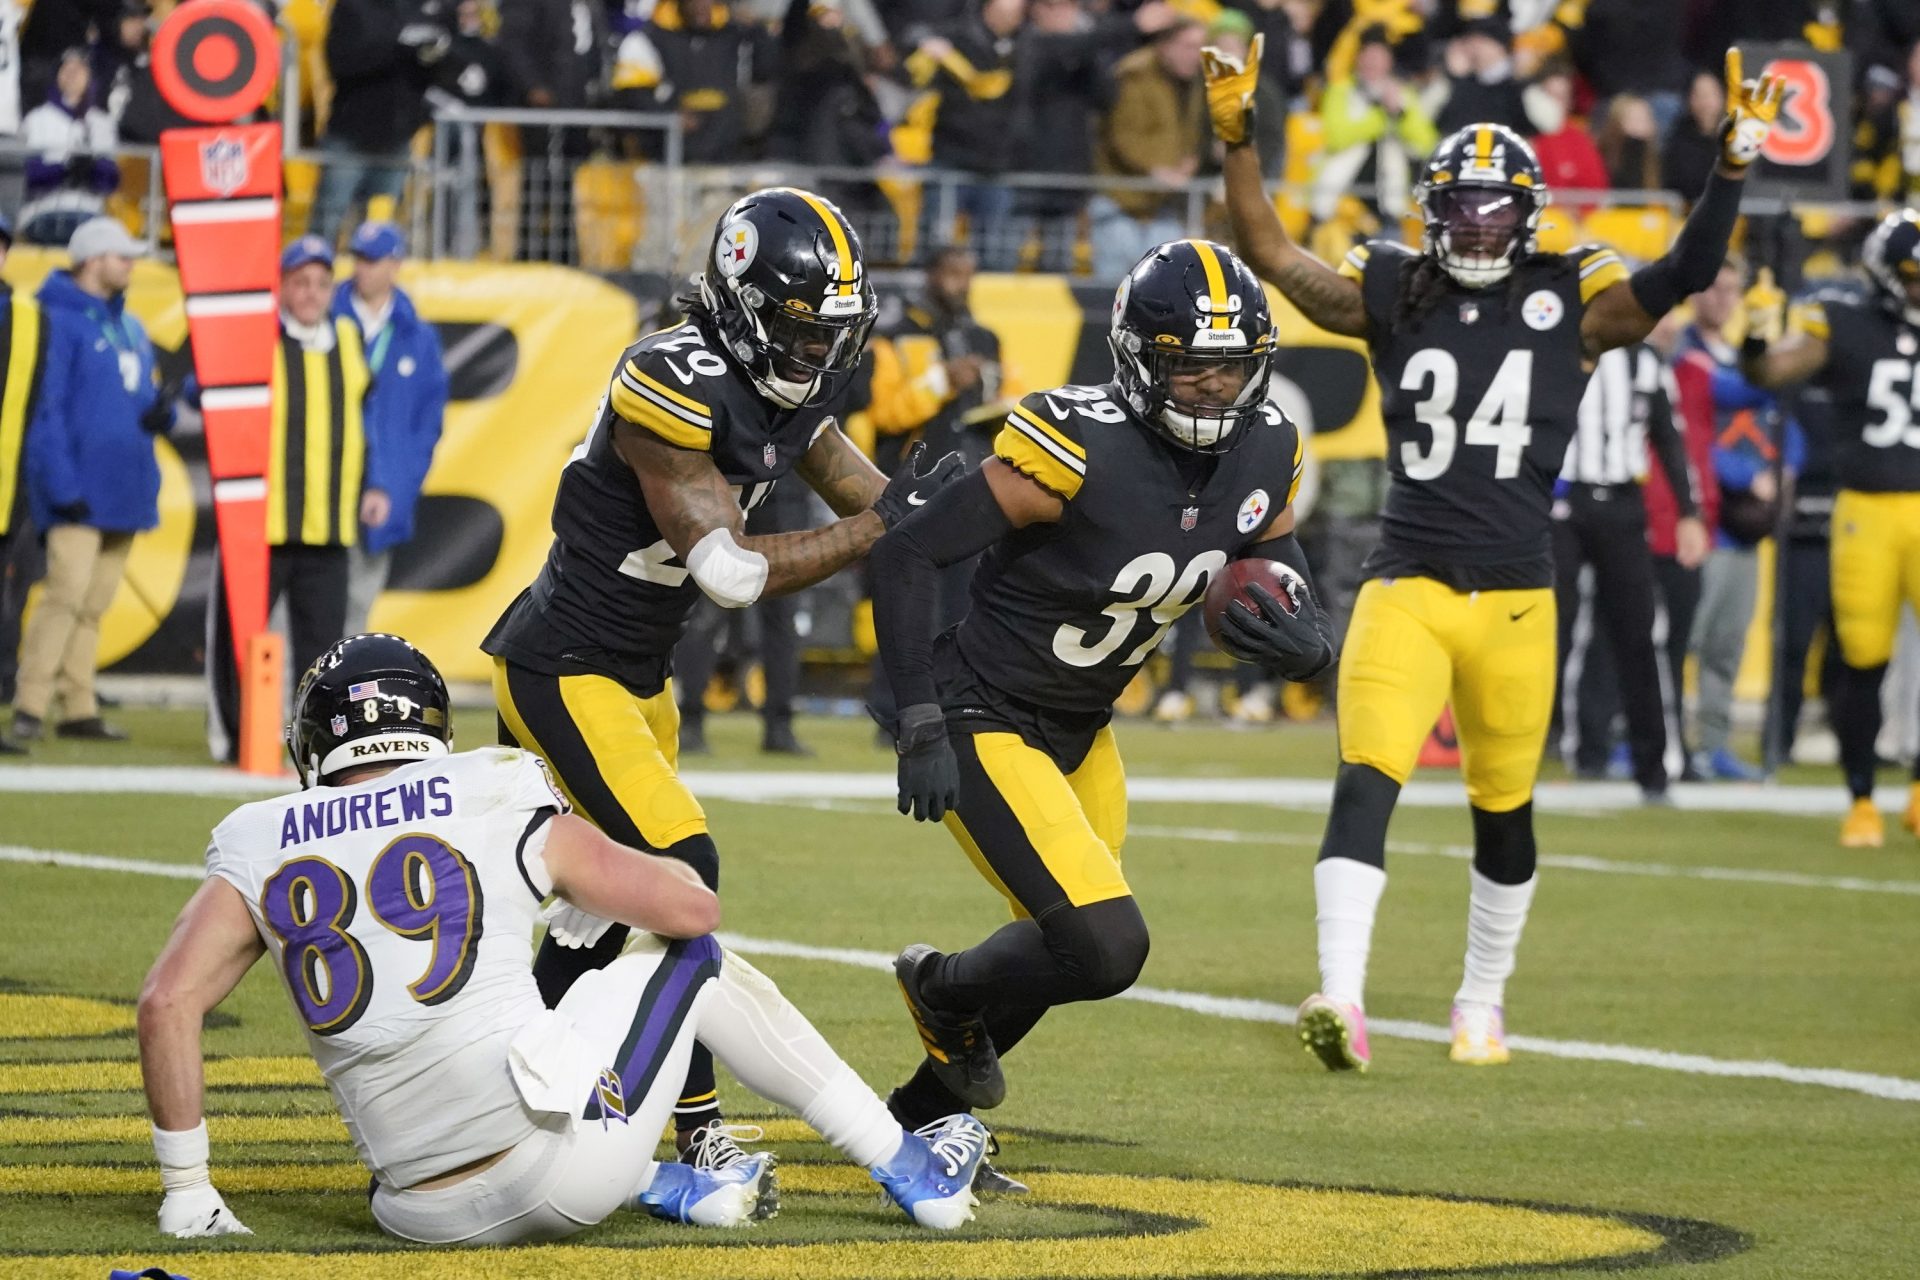 Pittsburgh Steelers free safety Minkah Fitzpatrick (39) celebrates after he intercepted a pass to Baltimore Ravens tight end Mark Andrews (89) during the first half of an NFL football game, Sunday, Dec. 5, 2021, in Pittsburgh.